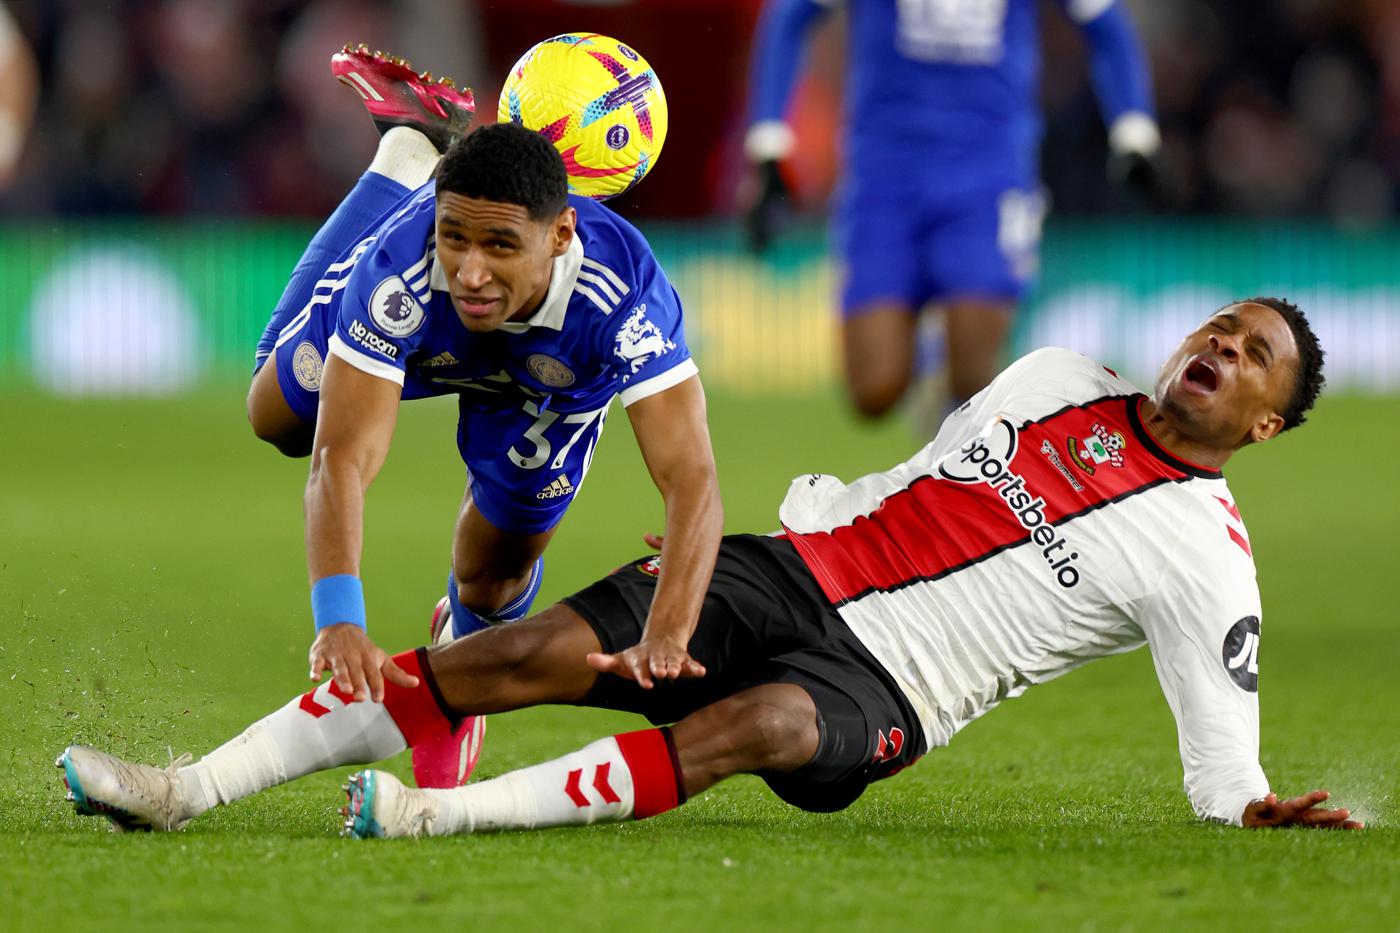 Southampton vs Leicester - 1-0. English Championship, 26th round. Match review, statistics